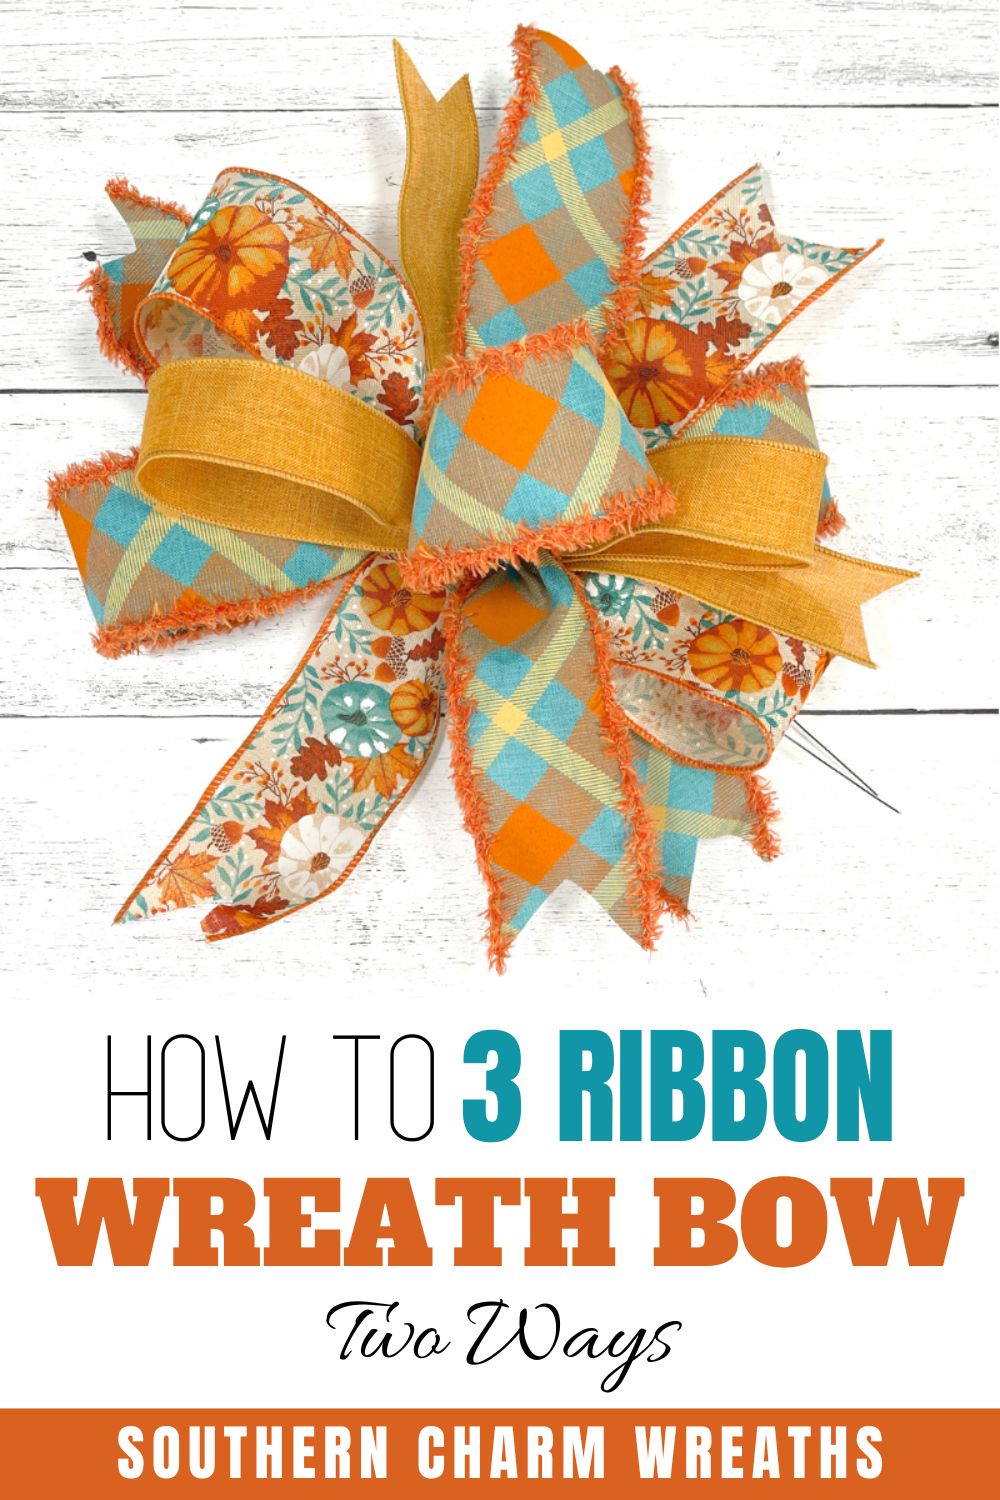 How to Make Bows for Wreaths Archives - Southern Charm Wreaths